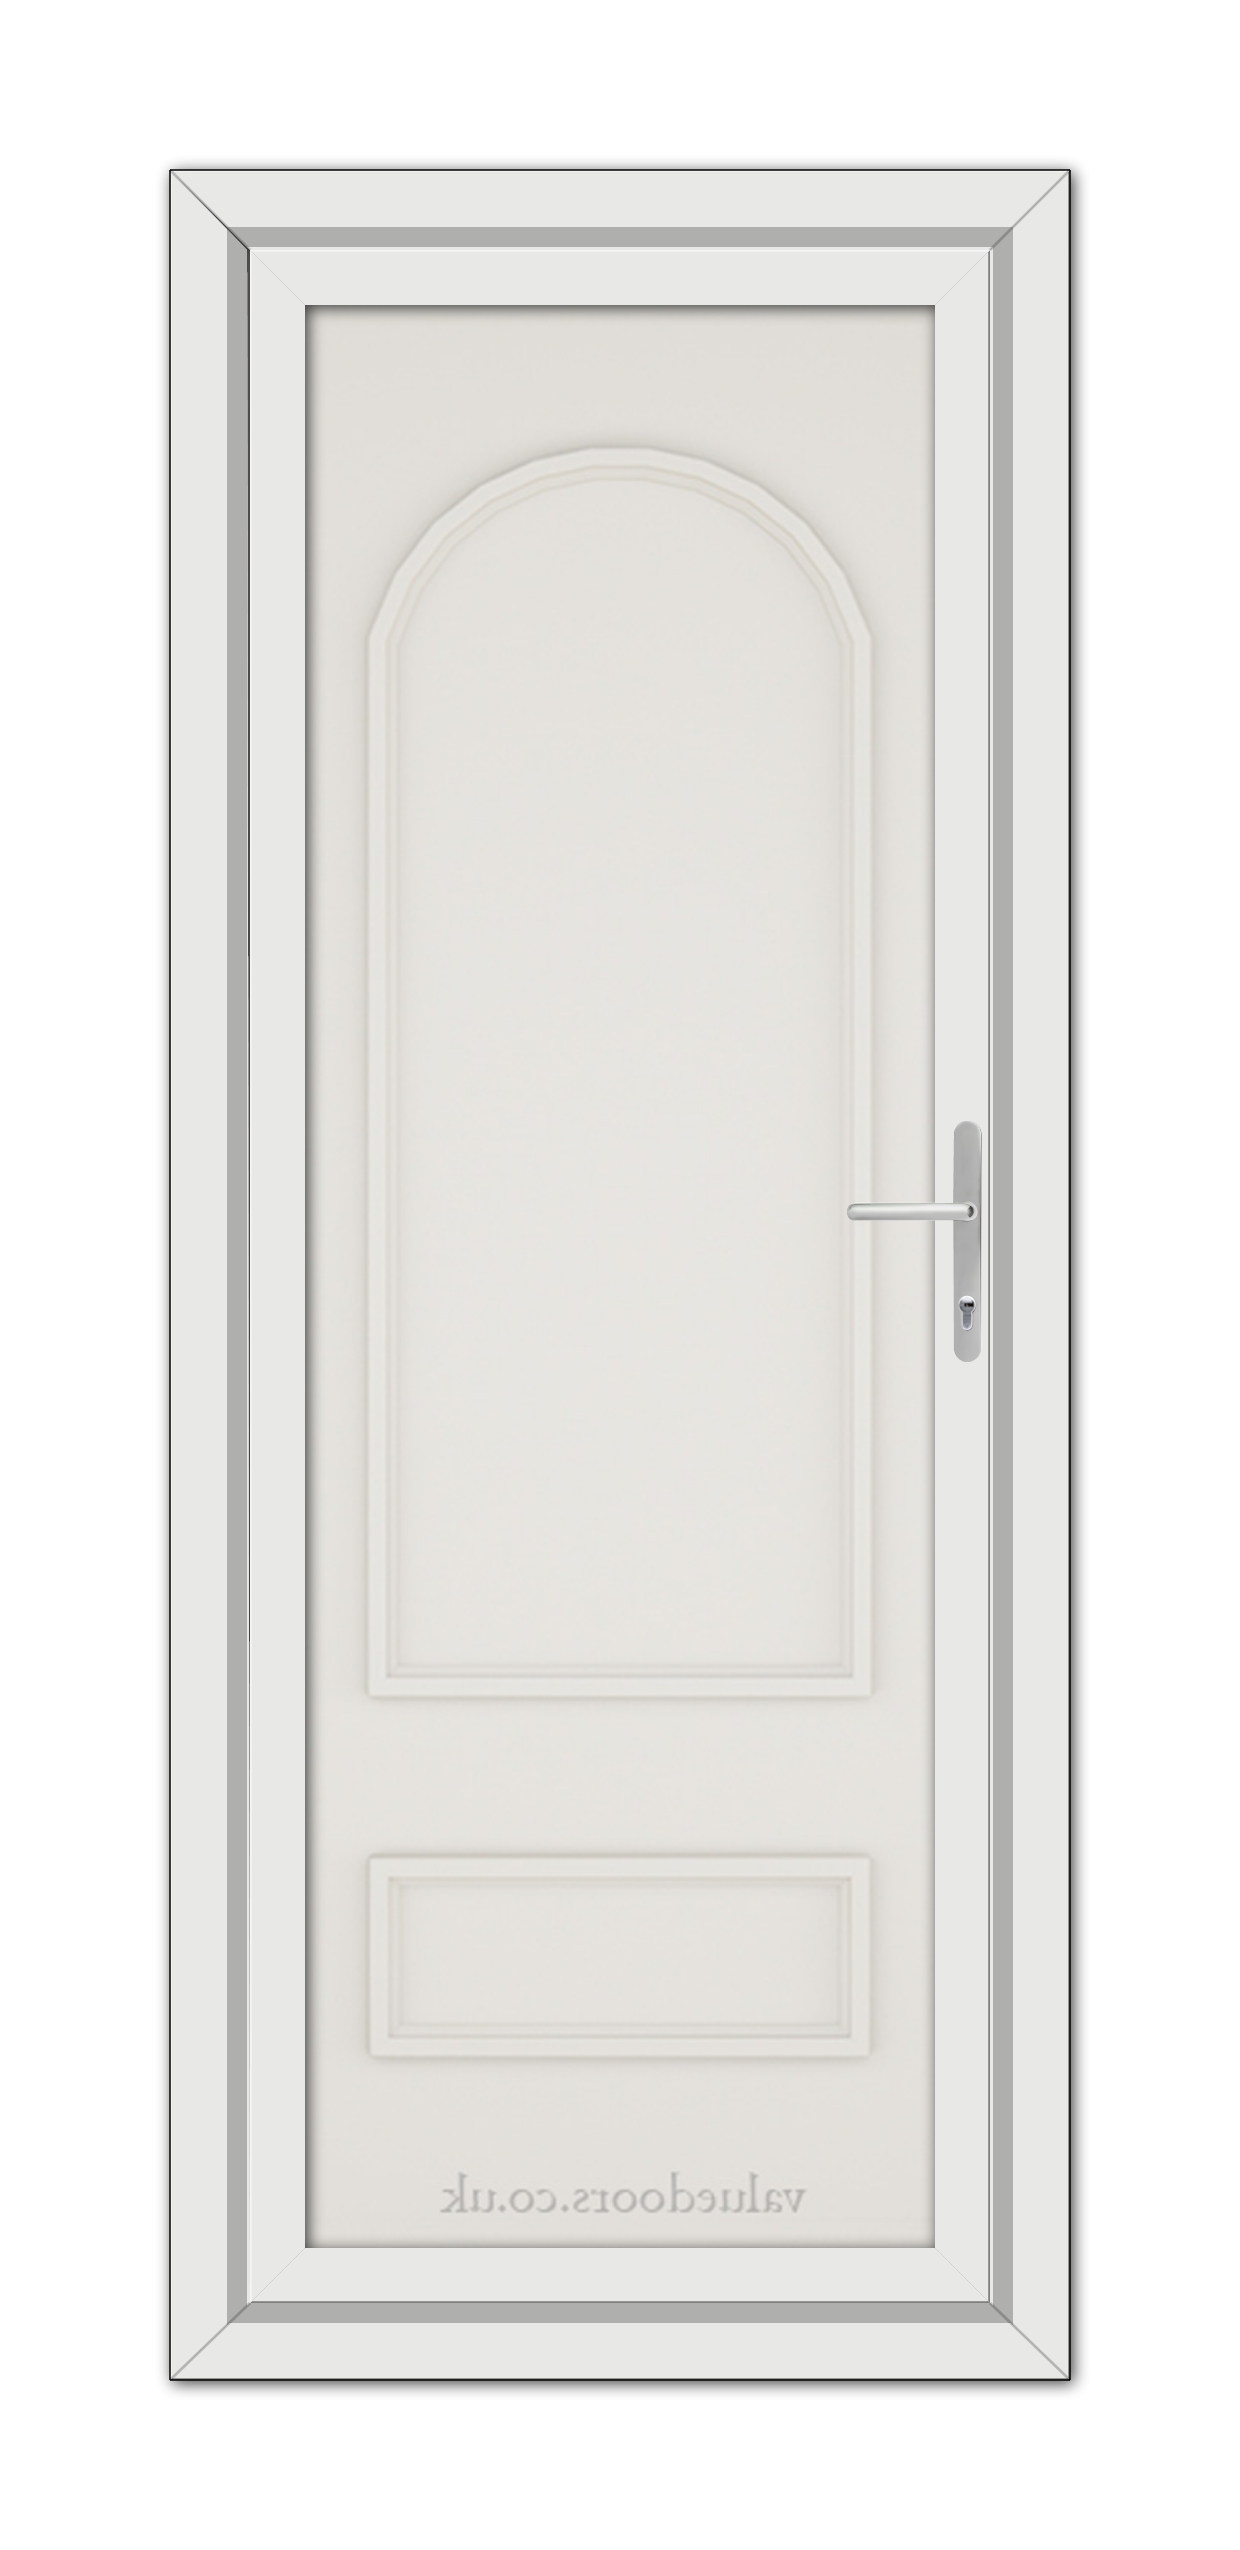 A White Cream Canterbury Solid uPVC Door with a silver handle.